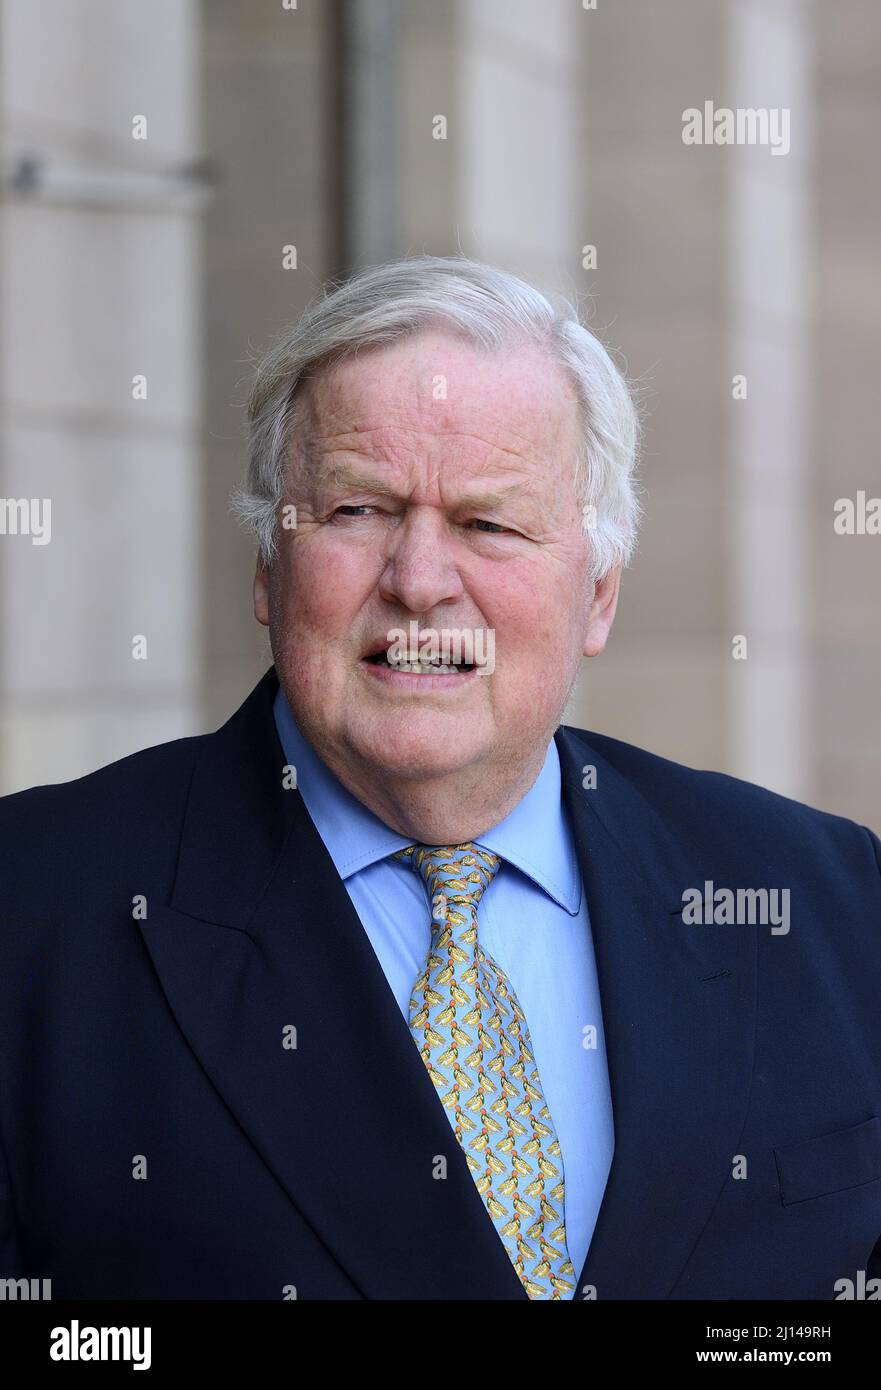 Chris stewart portrait hi-res stock photography and images - Alamy